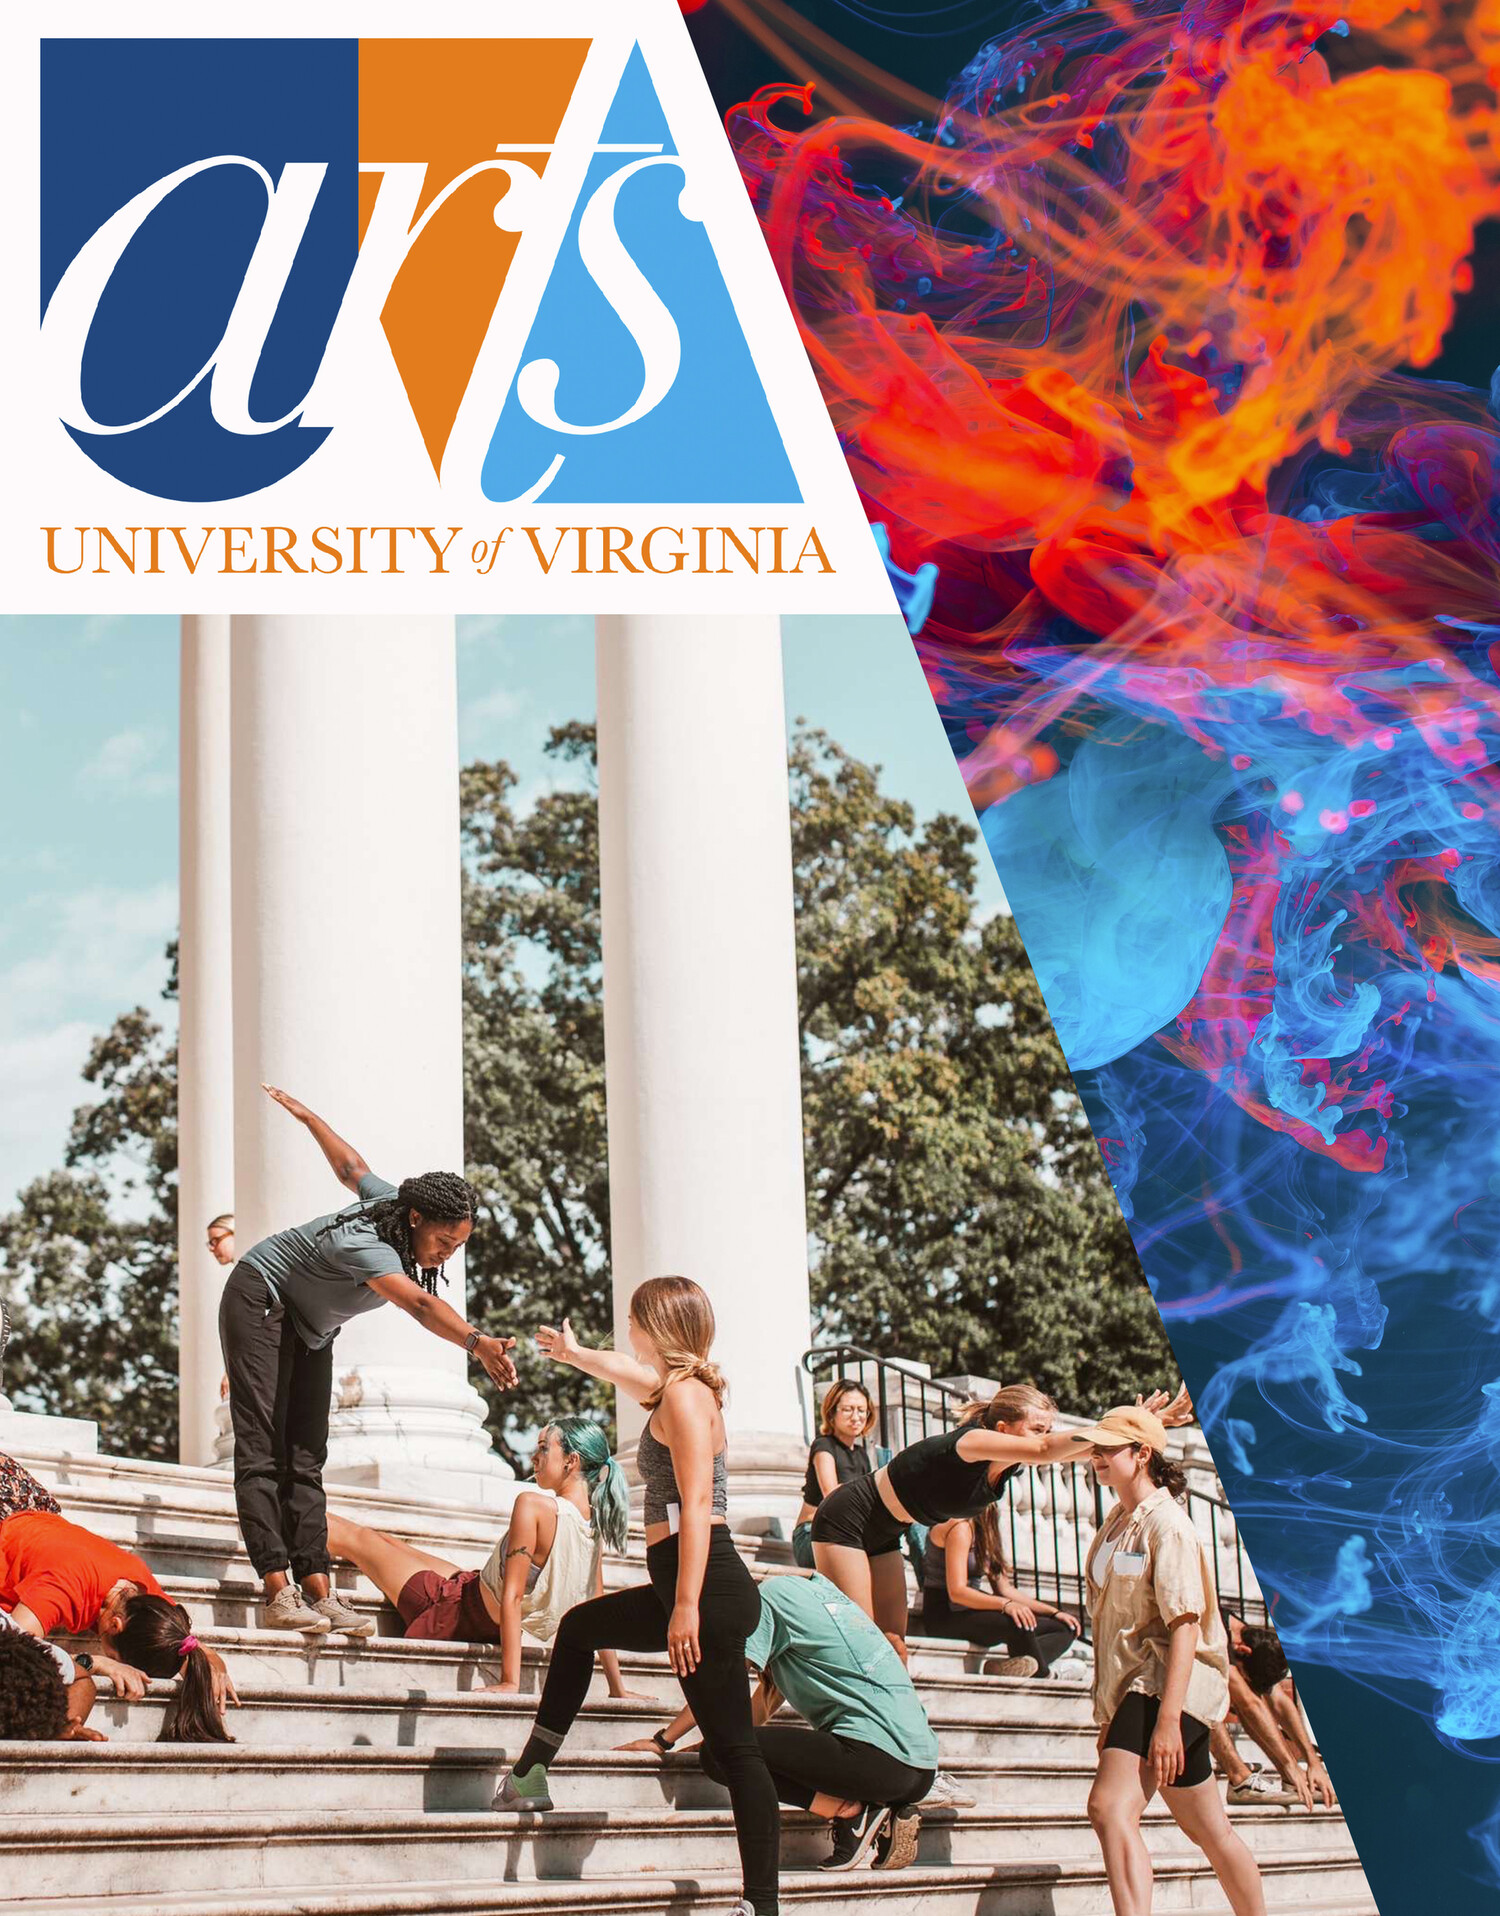 LEFT: Students in Moving With/Against Choreographies of the Lawn, an Improvisational Score by Katie Schetlick. Image by Justin Estanislao. RIGHT: Photo of Orange & Blue Ink by Lucas Benjamin on Unsplash